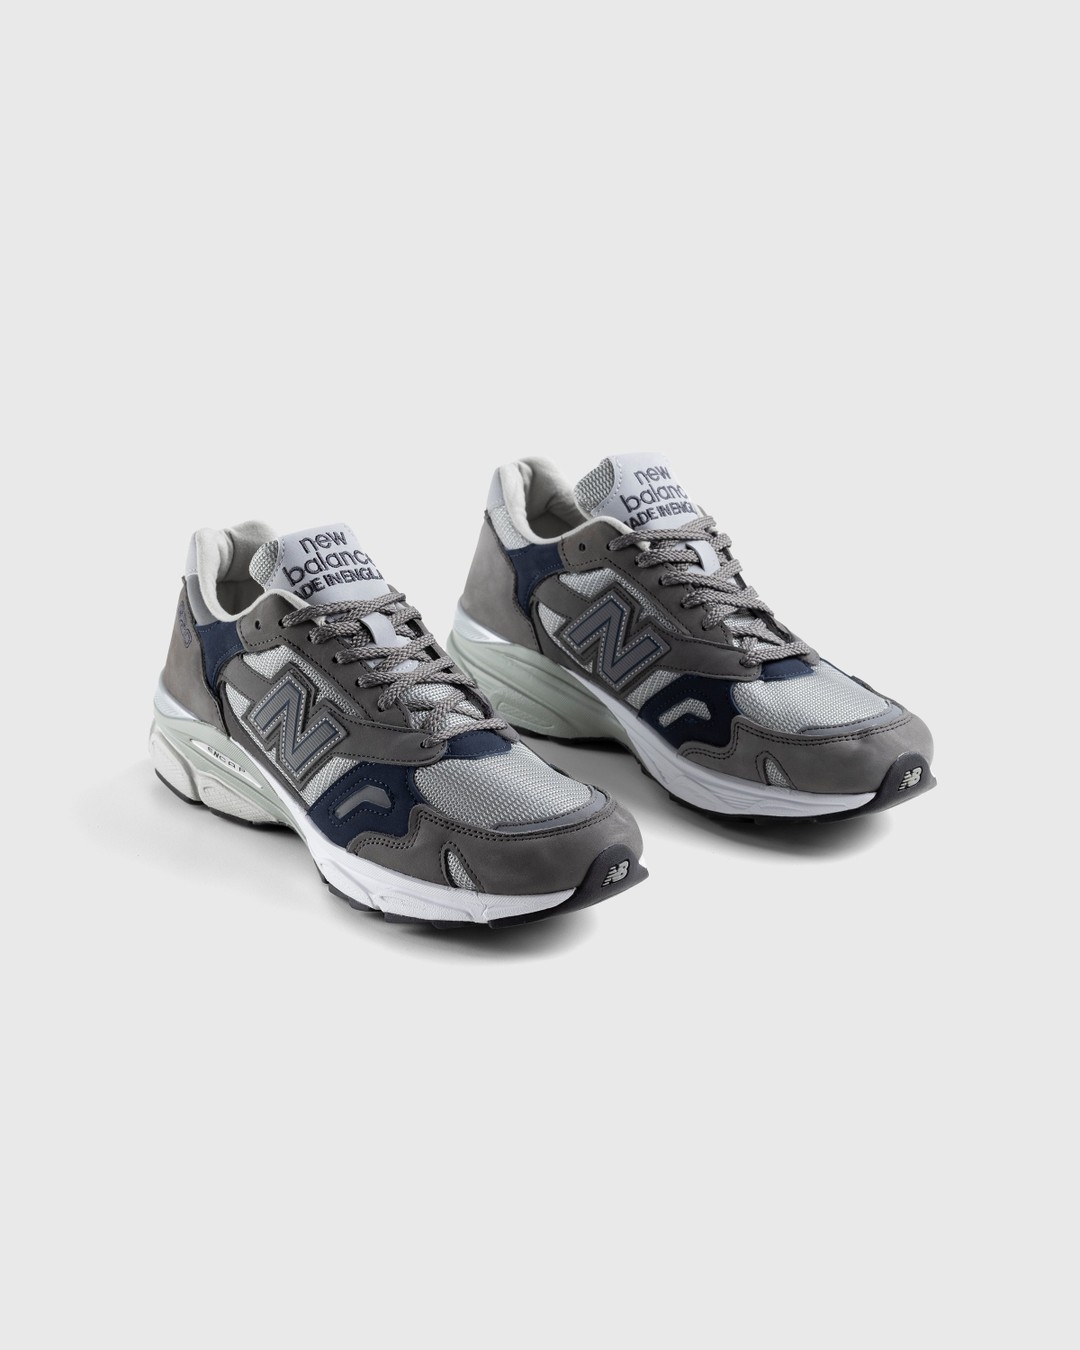 New Balance – M920GNS Grey/Navy - Low Top Sneakers - Grey - Image 3